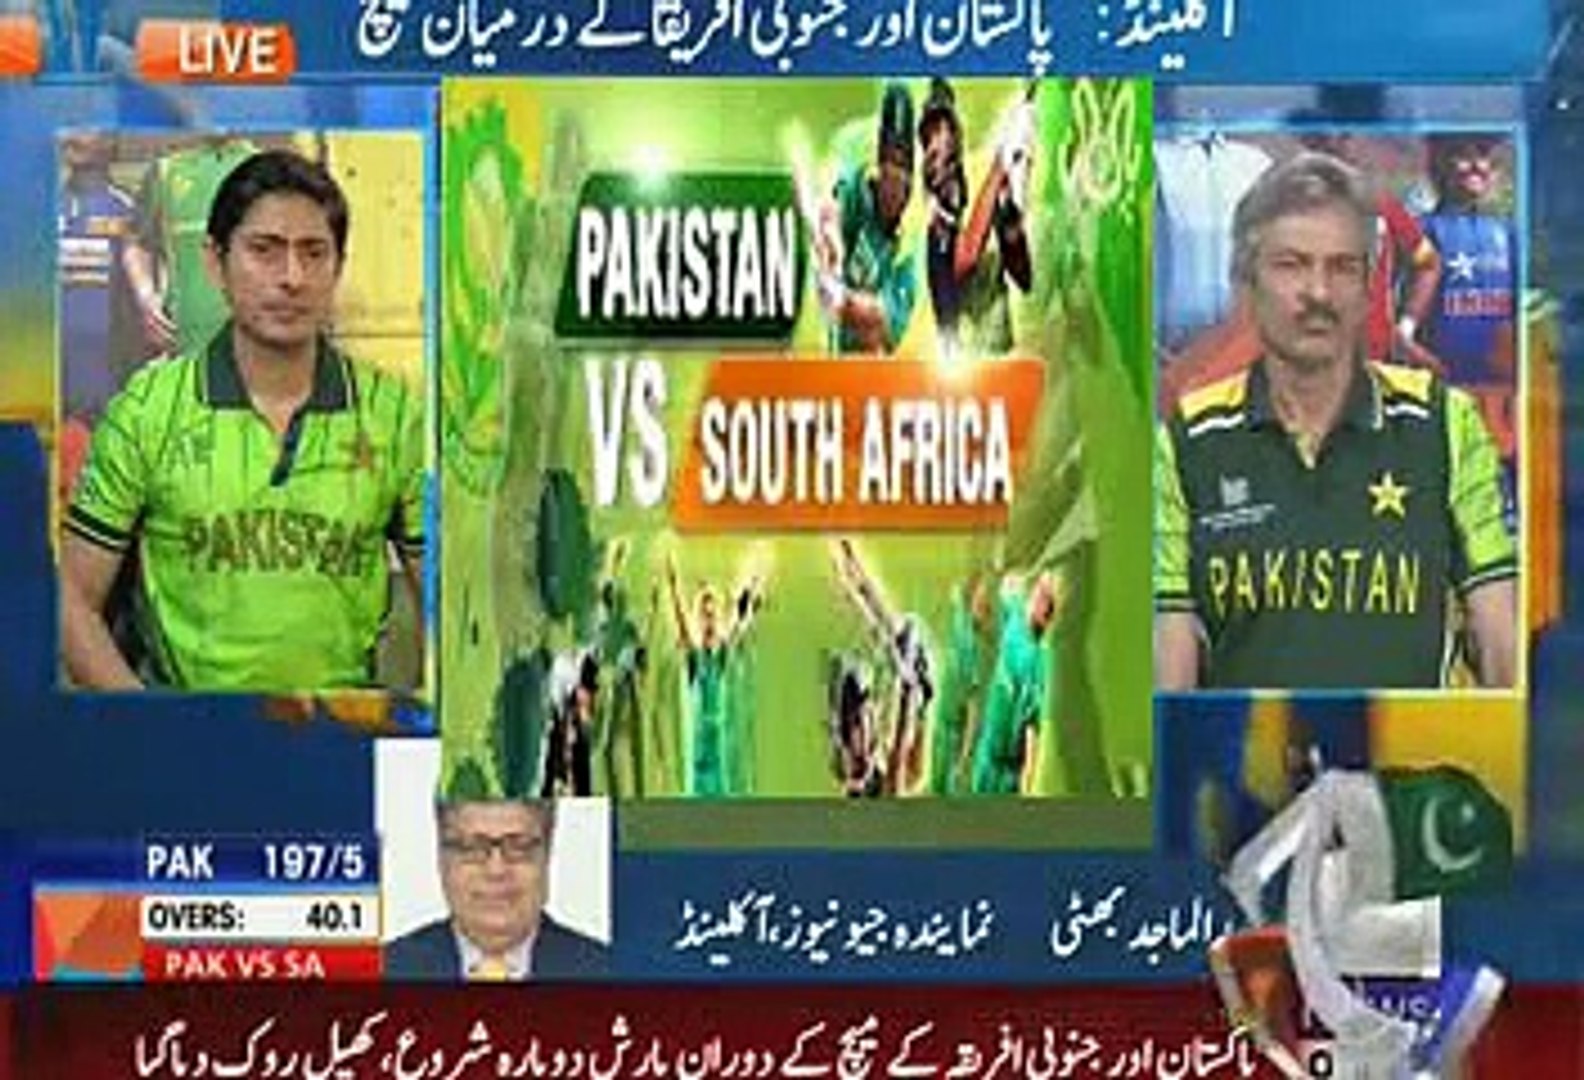 Pakistan vs South Africa 7 March 2015 - IN MATCH Highlights world cup 2015 